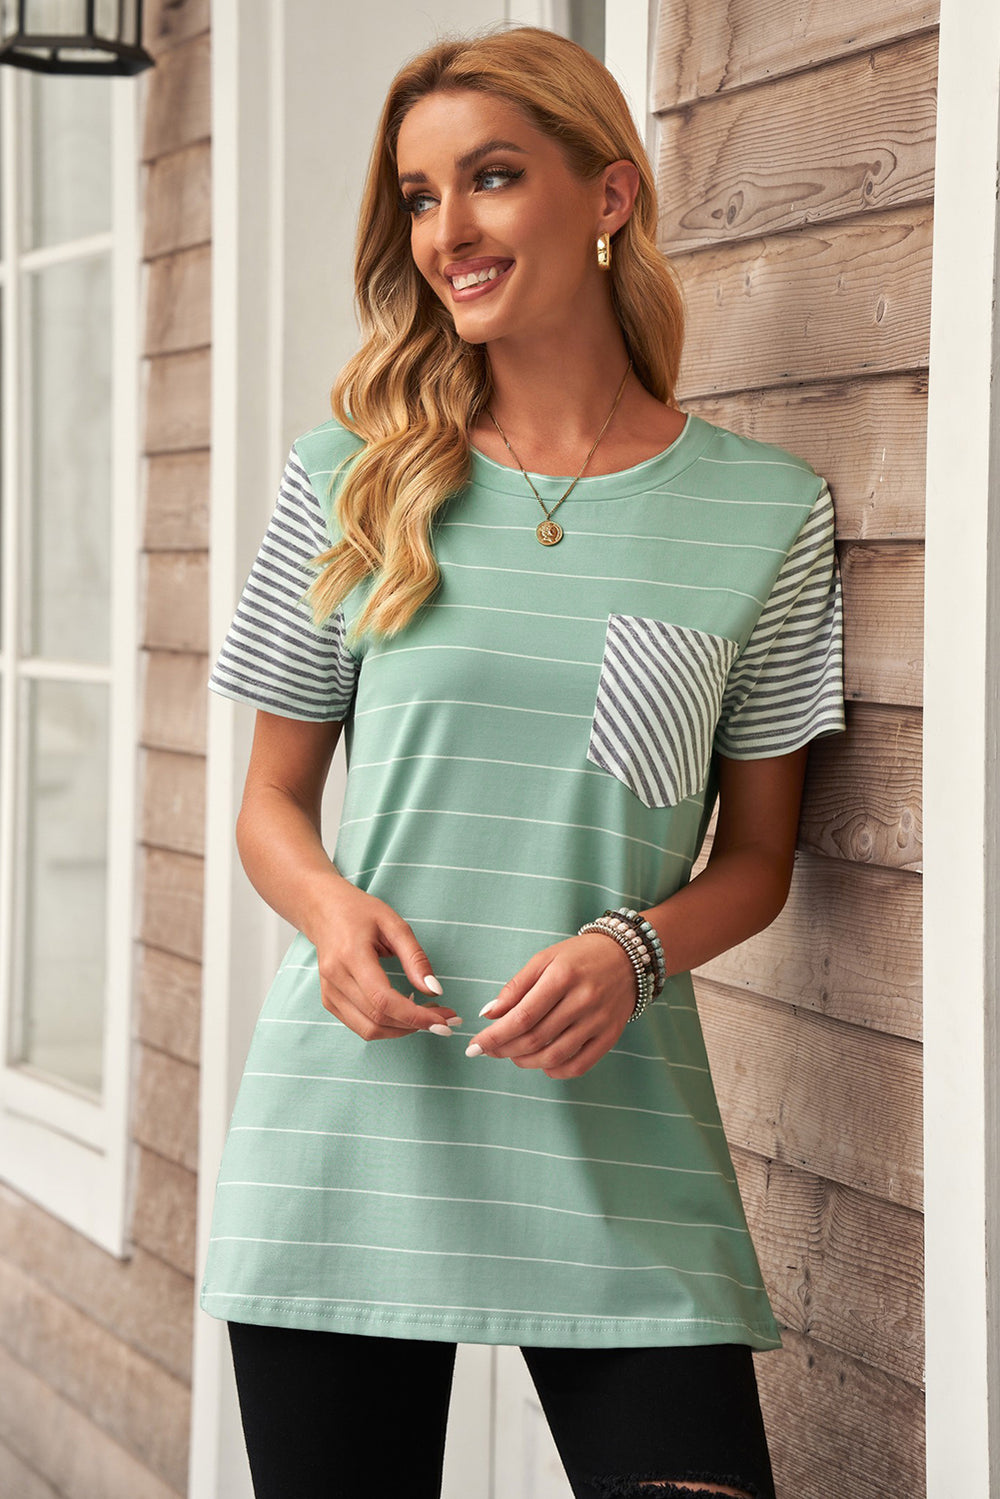 Women's Green Striped Short Sleeve Contrast Color T-Shirt with Pocket